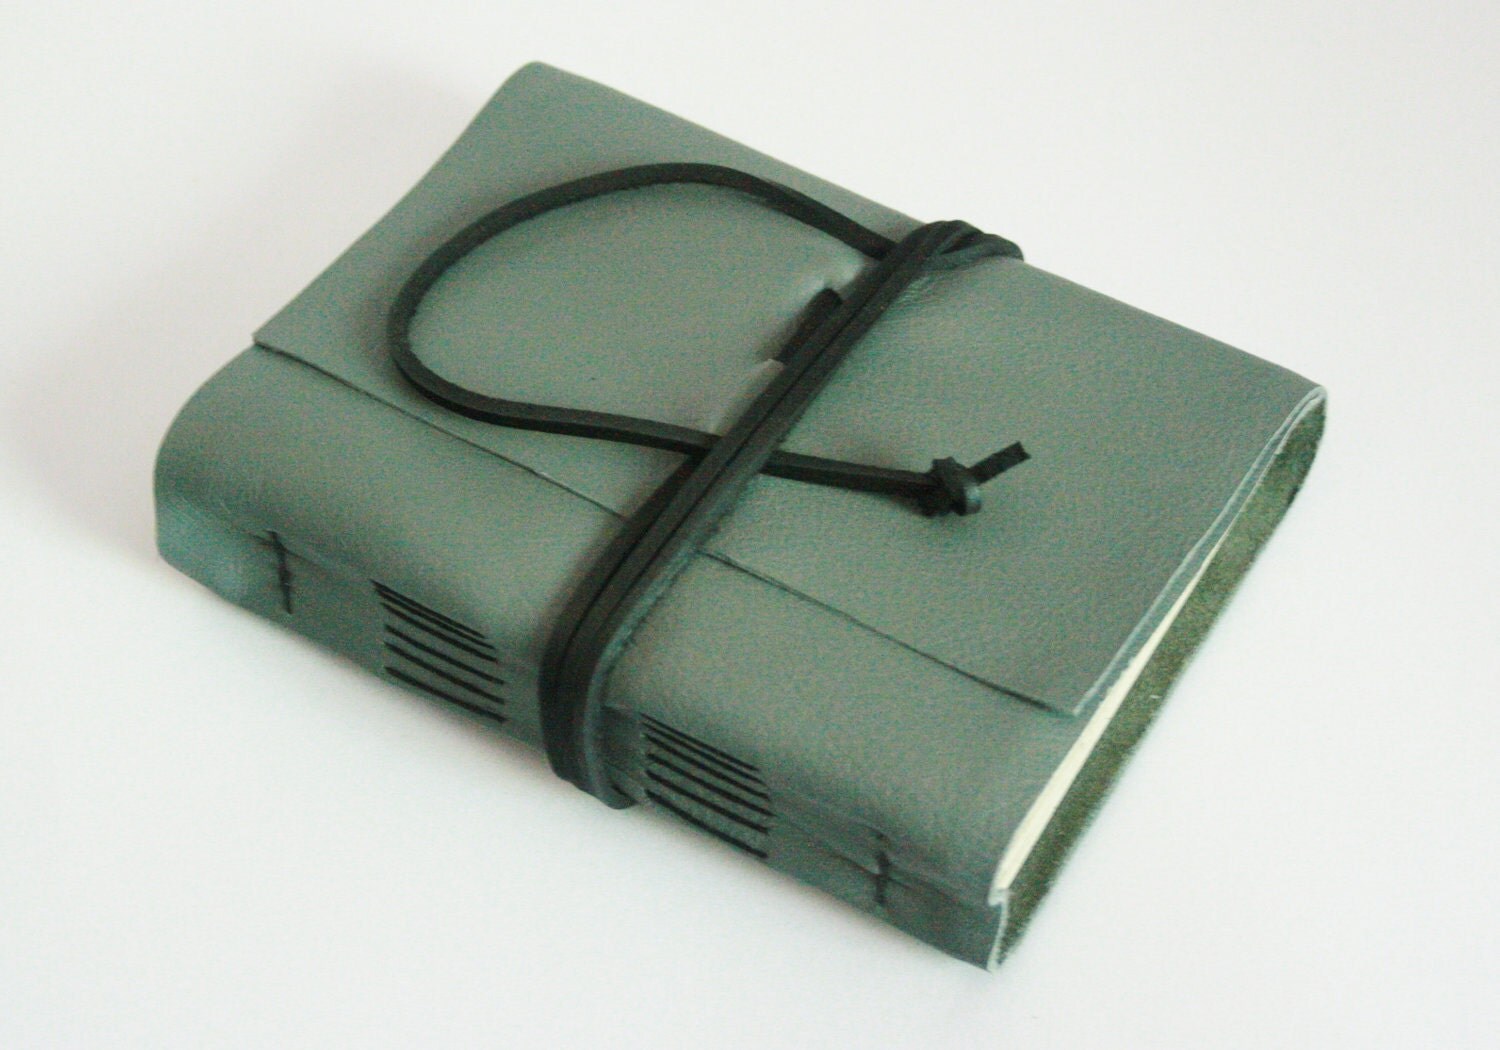 Leather Journal, Green Gray, Hand-Bound 4.5 x 6 Journal by The Orange Windmill on Etsy